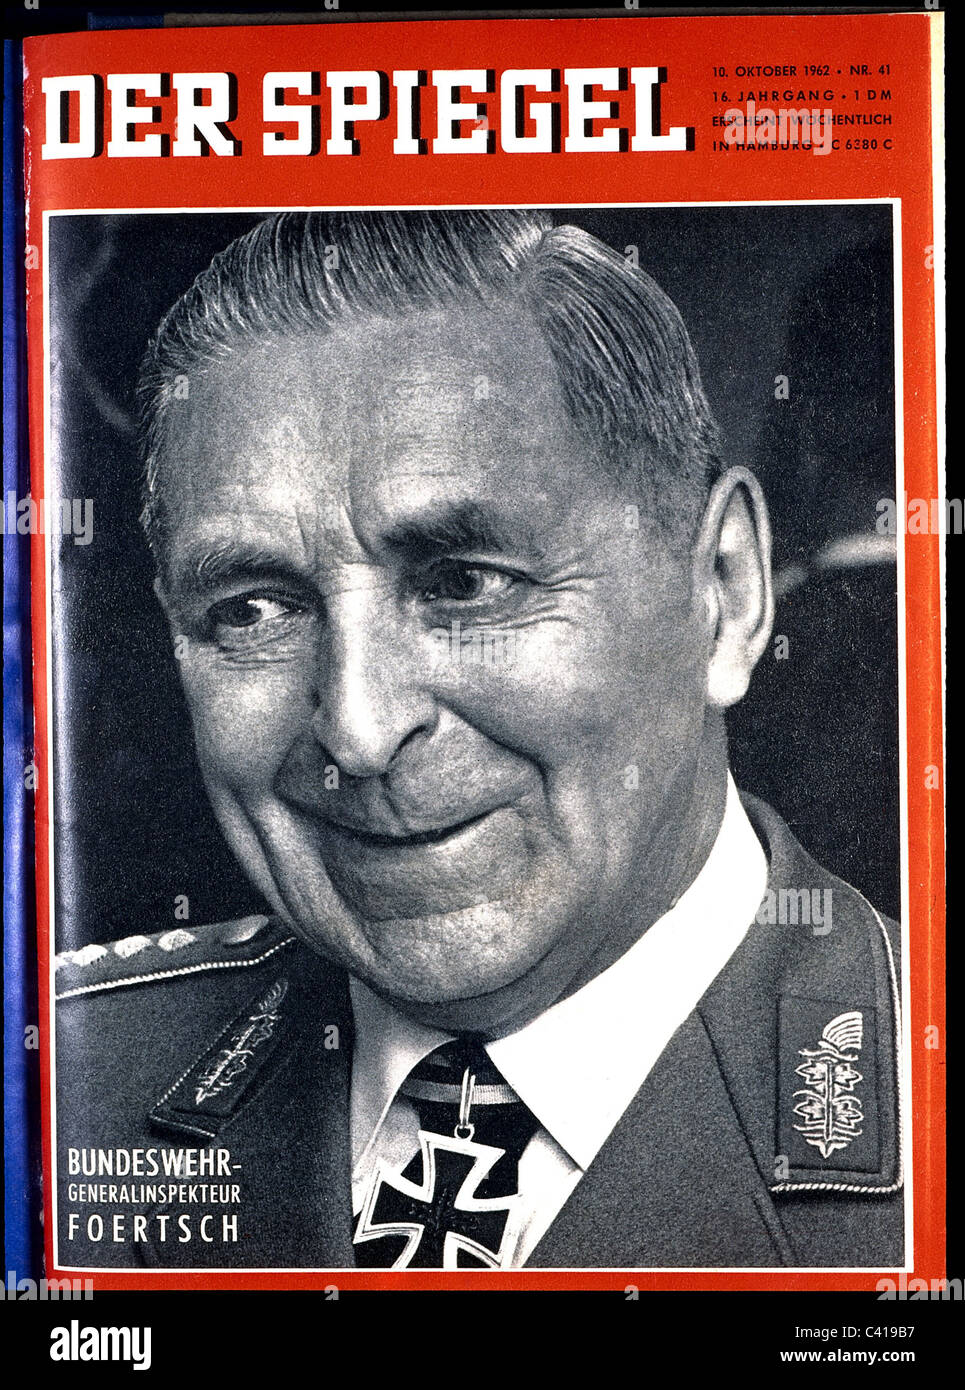 press / media, Germany "Der Spiegel", No. 41, 10.10.1962, title page with a  portrait of Friedrich Foertsch, Inspector General of the Bundeswehr (this  issue of the Spiegel contained the article which lead